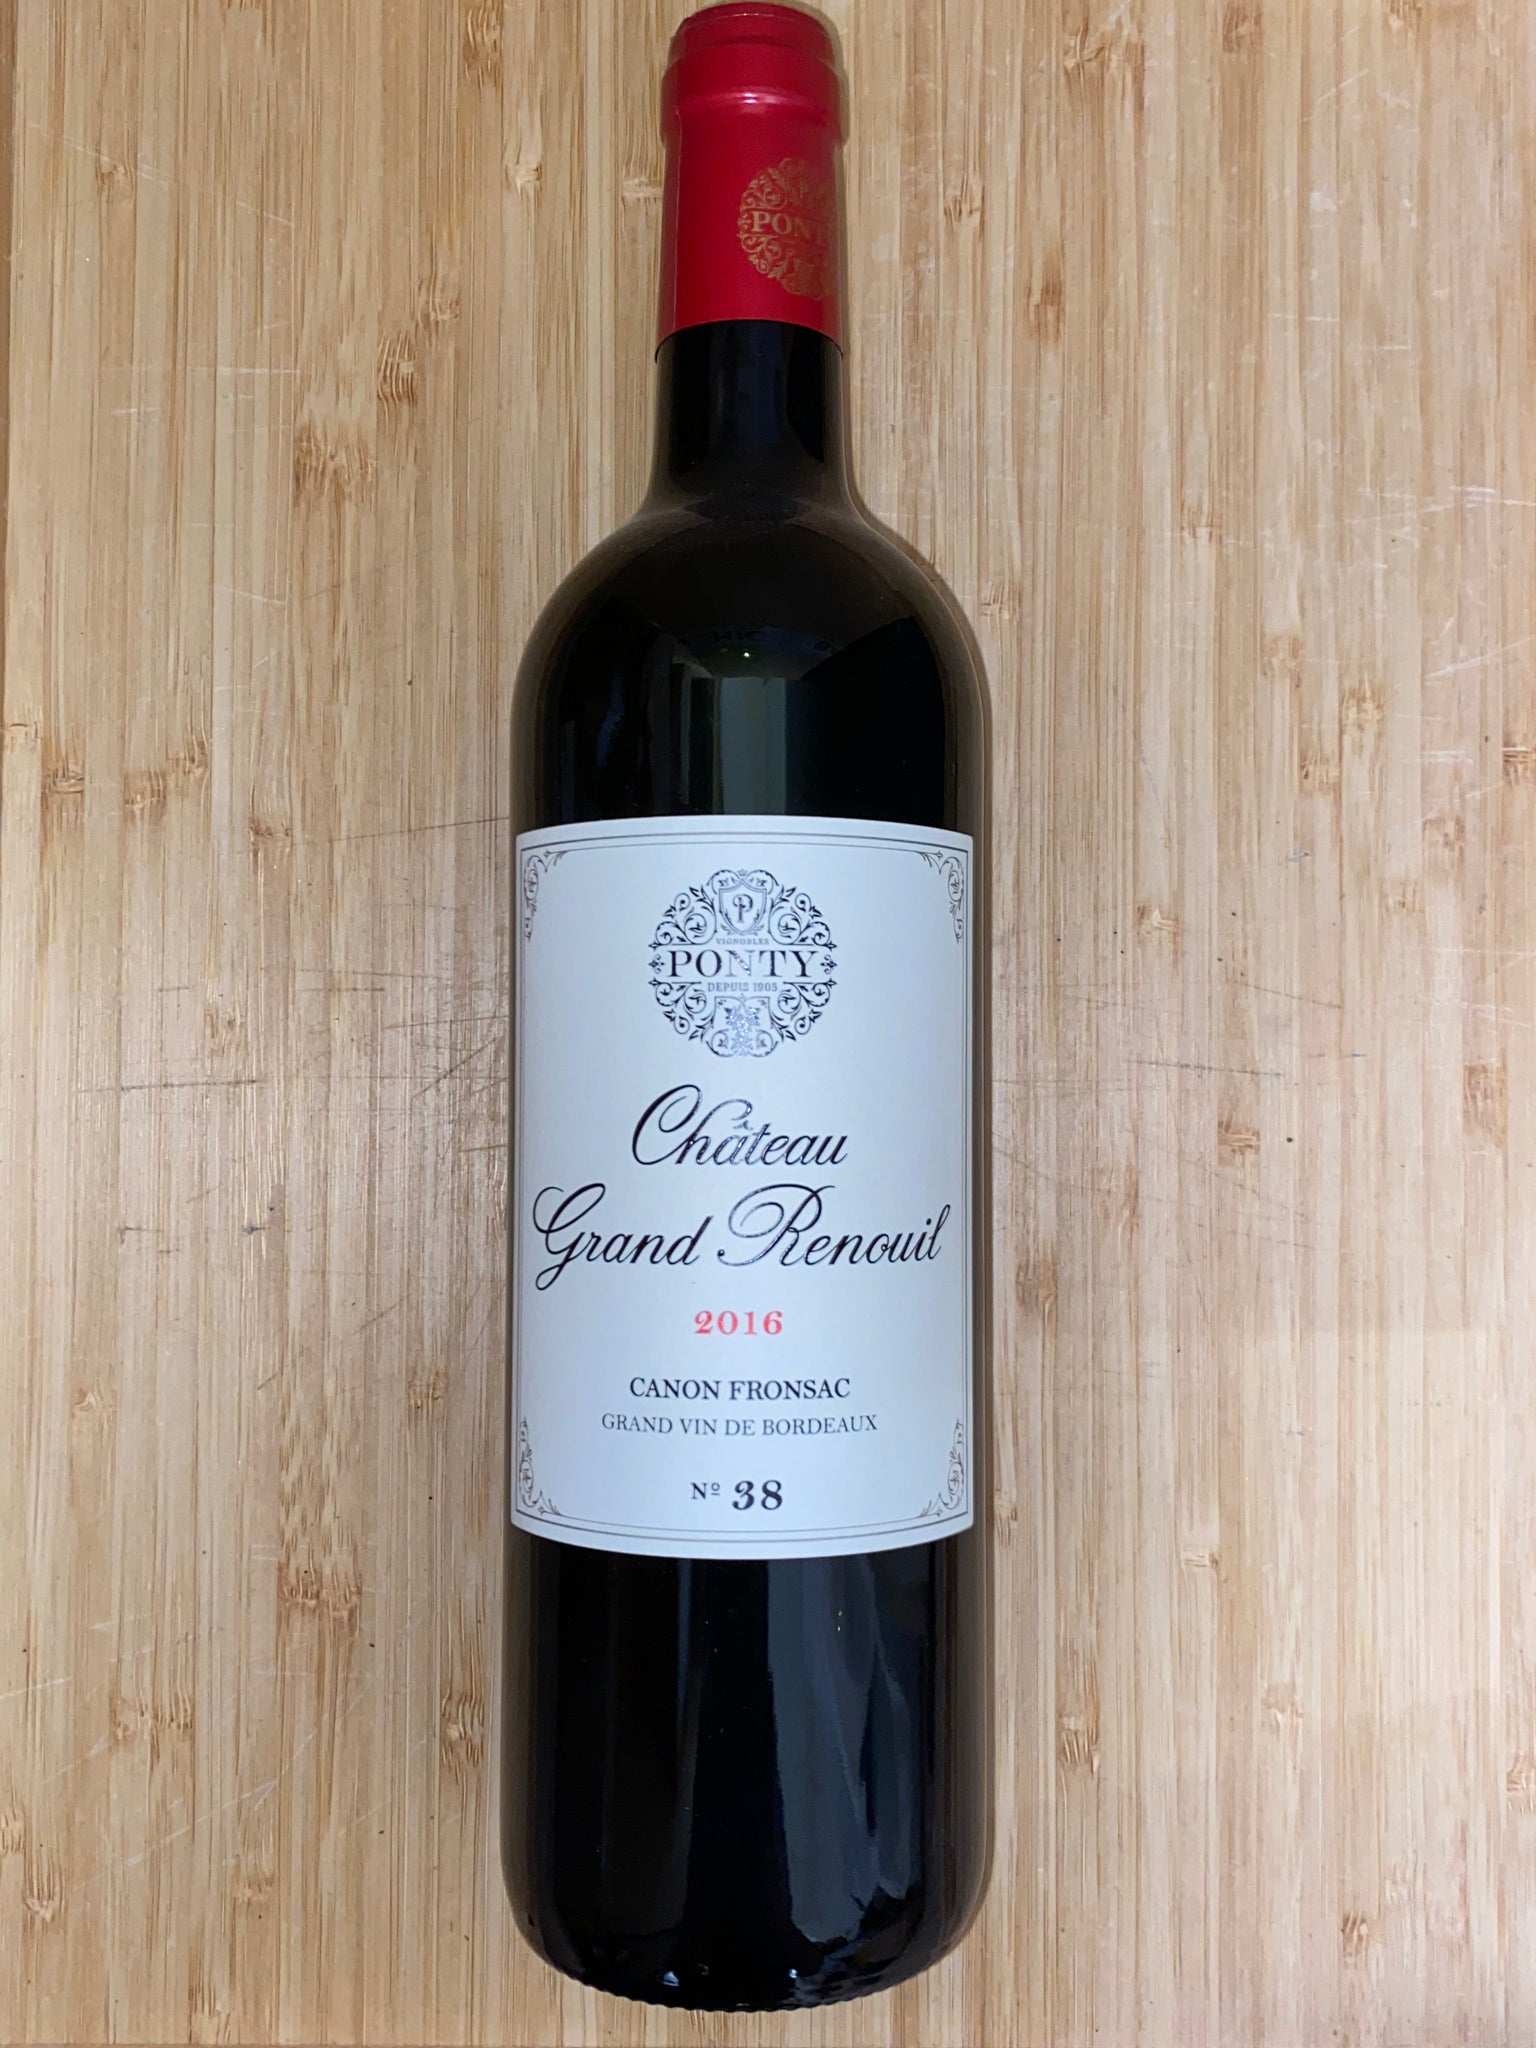 CHÂTEAU GRAND RENOUIL - CANON FRONSAC - 2016